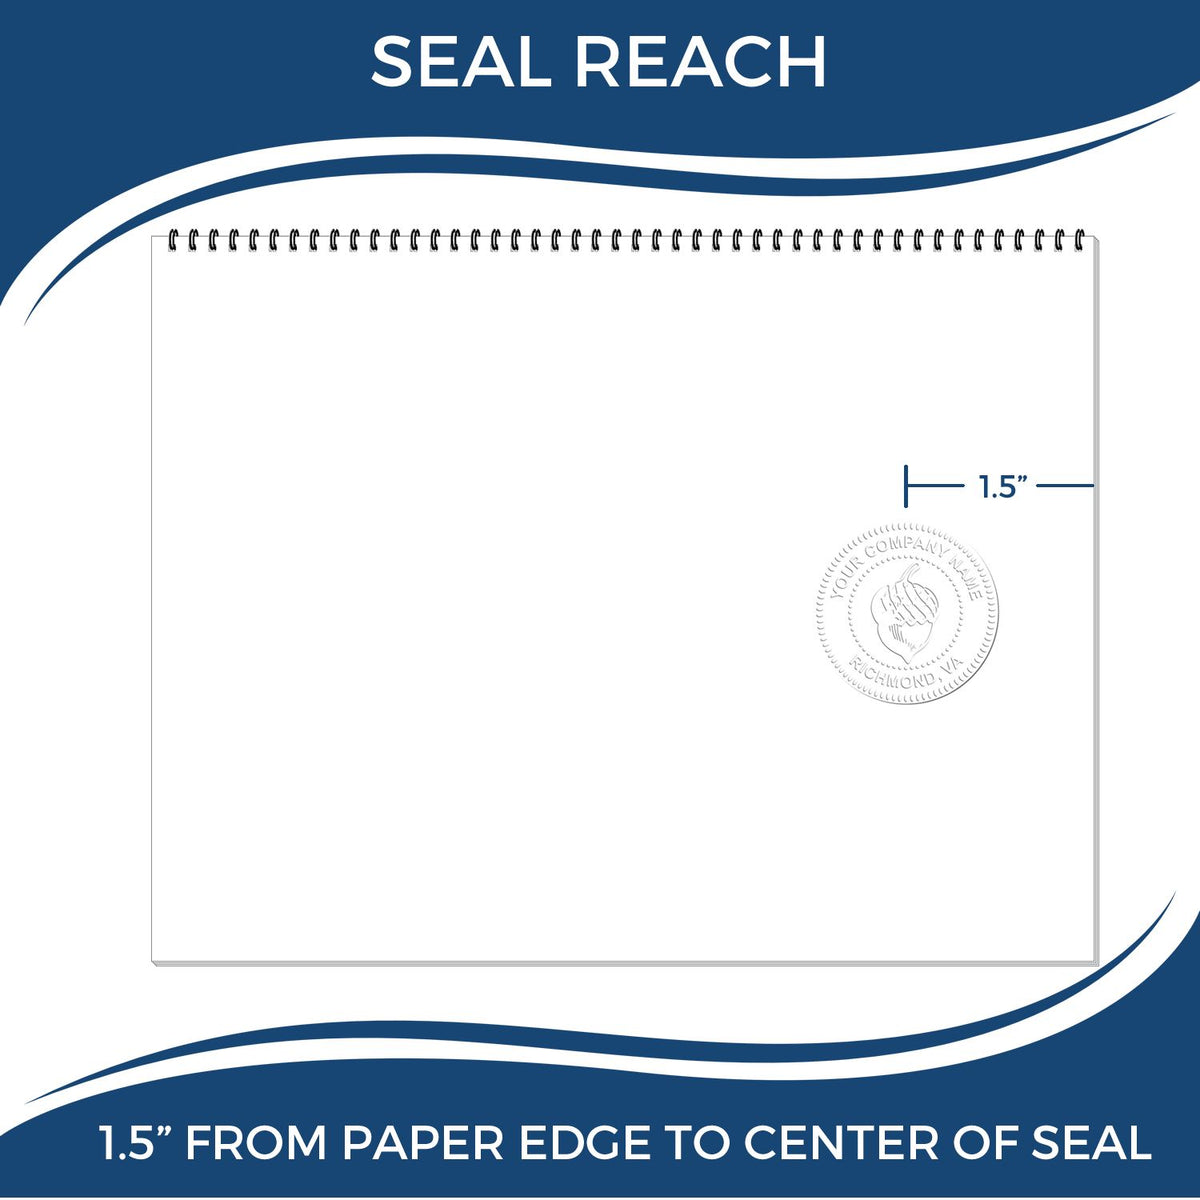 An infographic showing the seal reach which is represented by a ruler and a miniature seal image of the Soft Pocket Arkansas Landscape Architect Embosser